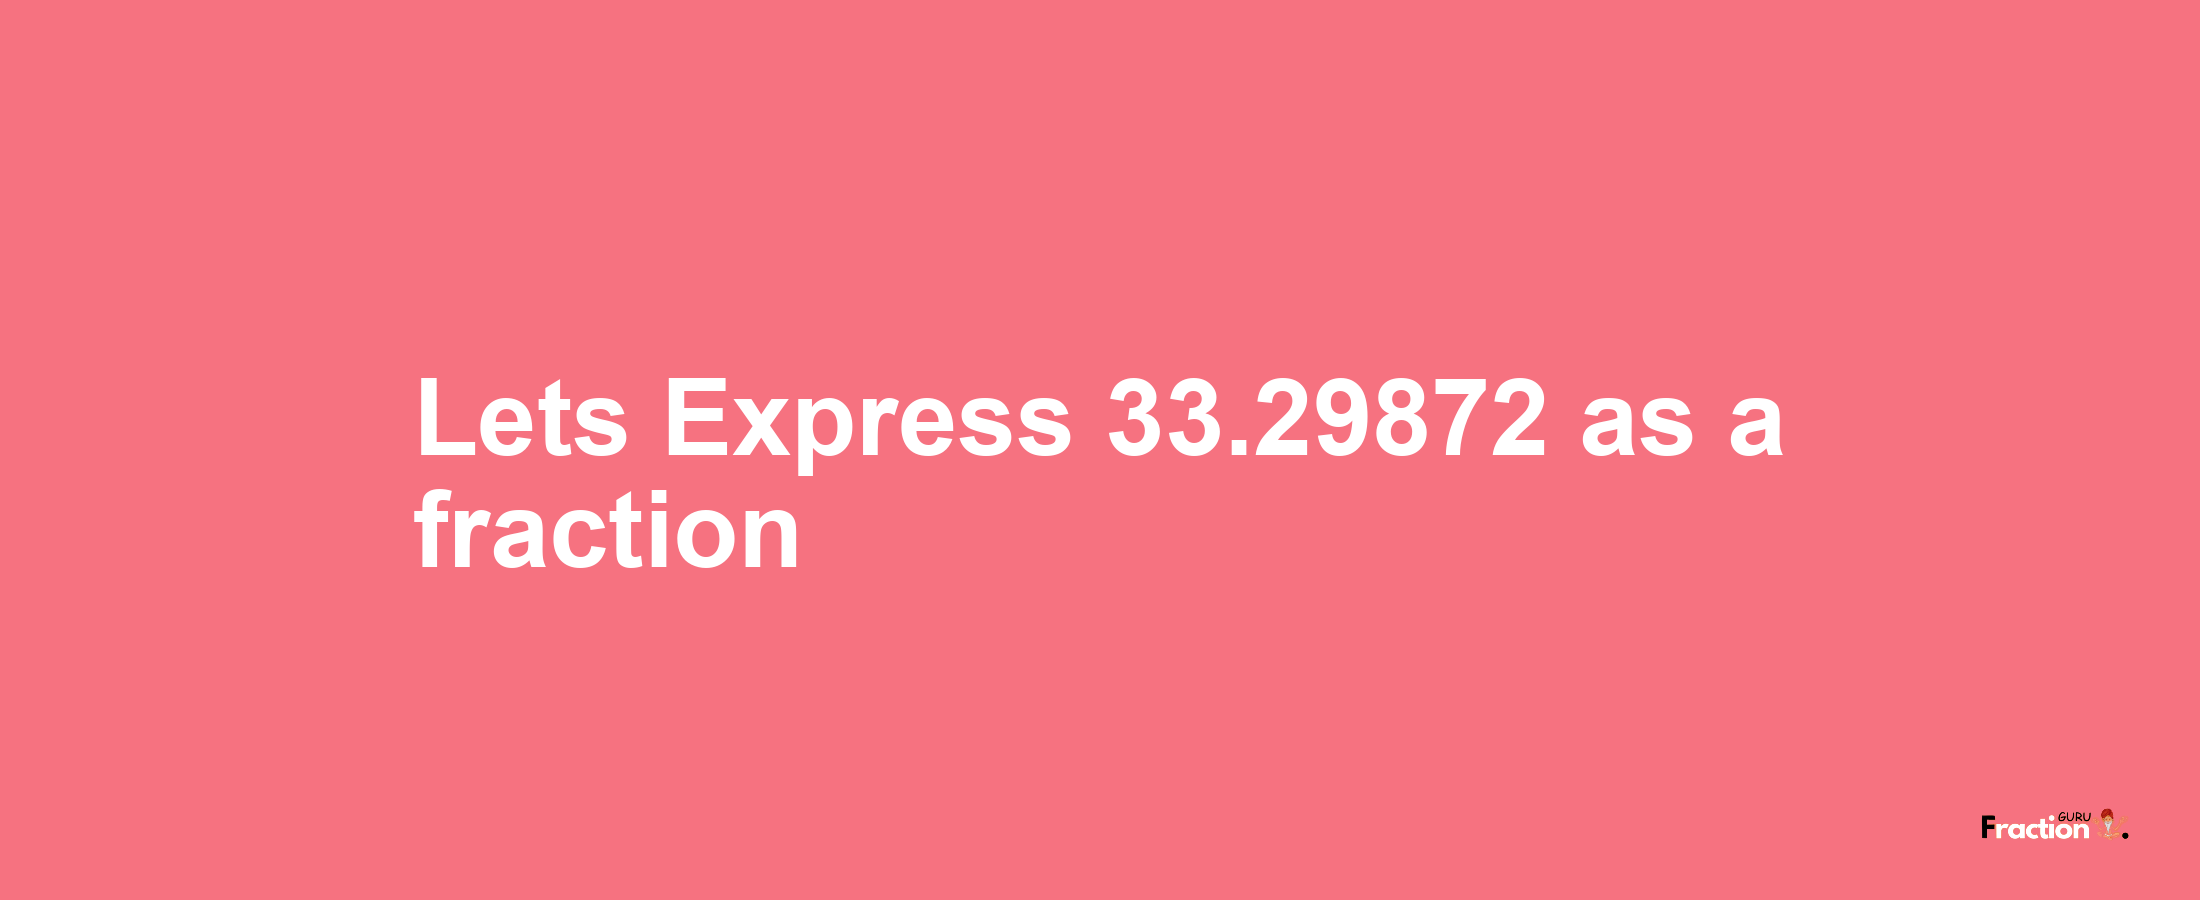 Lets Express 33.29872 as afraction